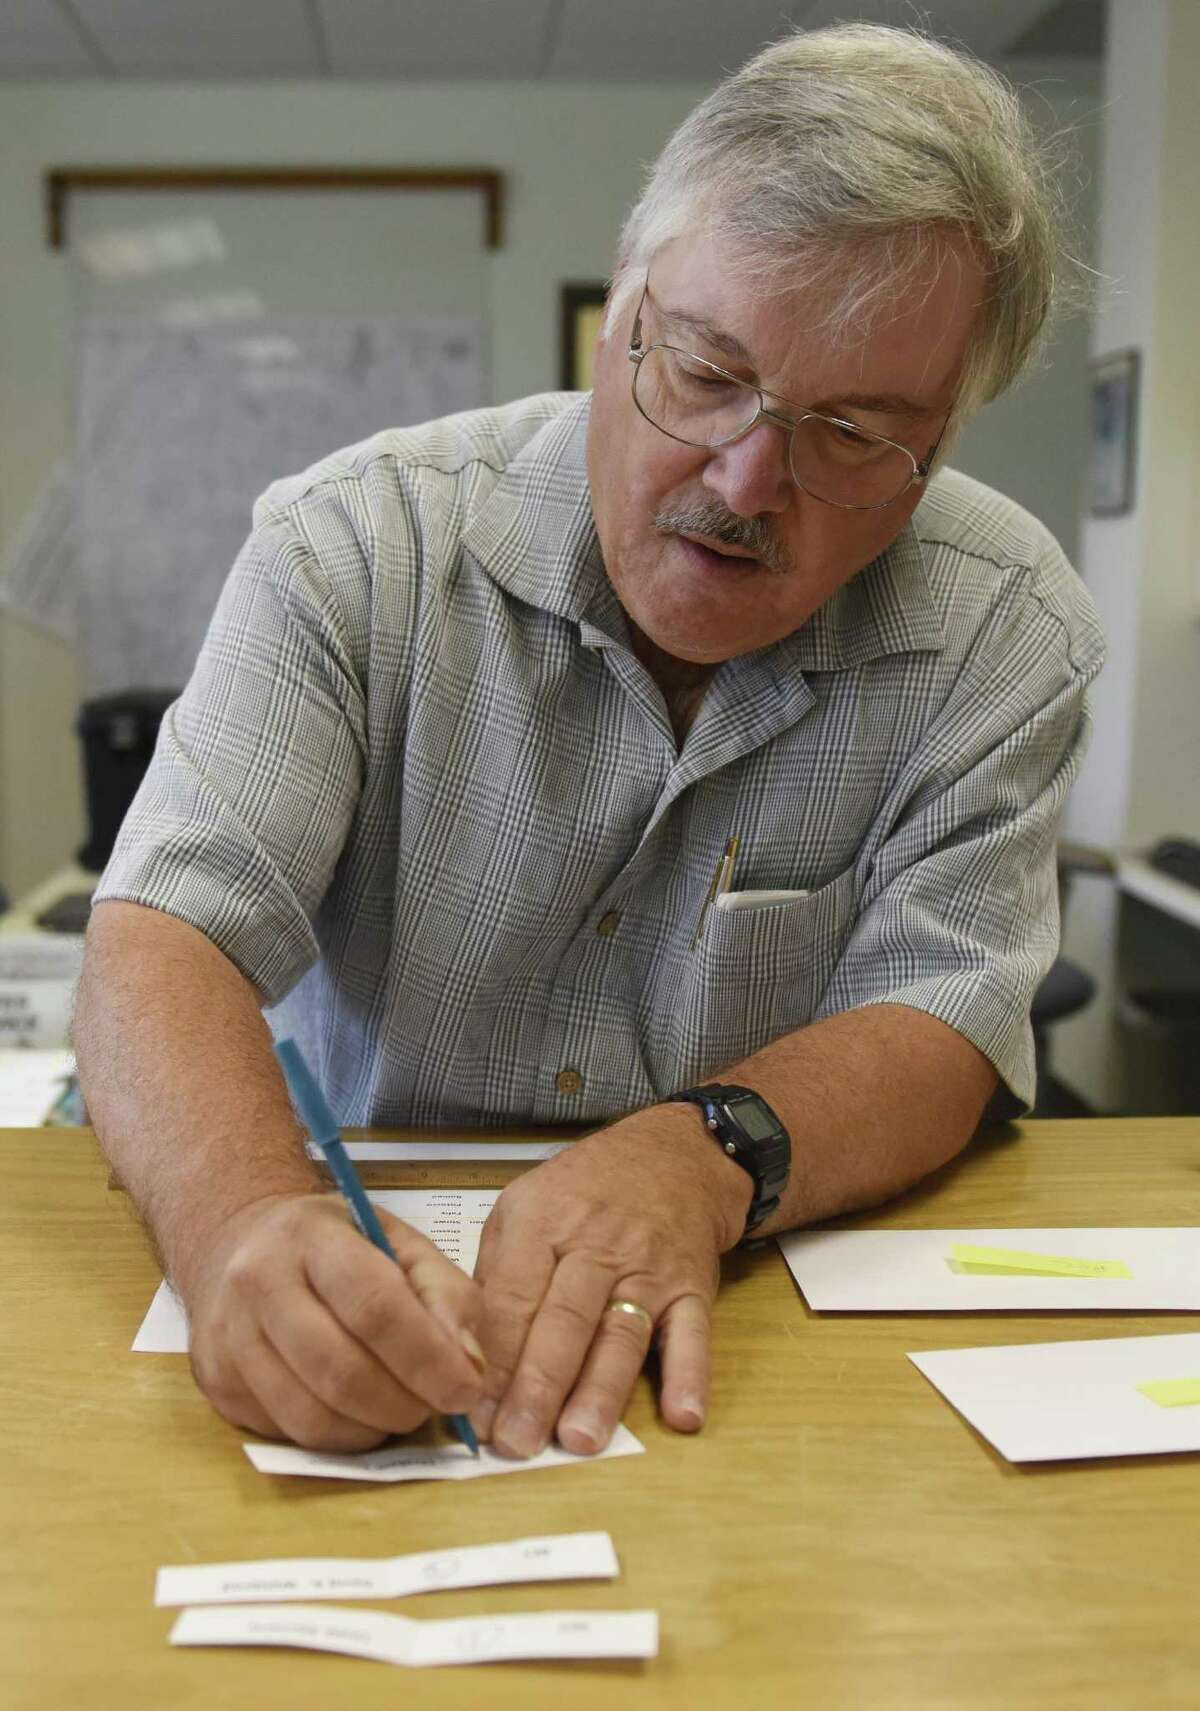 Democratic Registrar of Voters Mike Aurelia writes a candidate's names after drawing it from a tin during the Registrar of Voters ballot order lottery at Town Hall in Greenwich, Conn. Thursday, Aug. 24, 2017. The names of candidates were put into a biscotti tin and drawn blindly to determine the order in which they would be put on the election ballot.